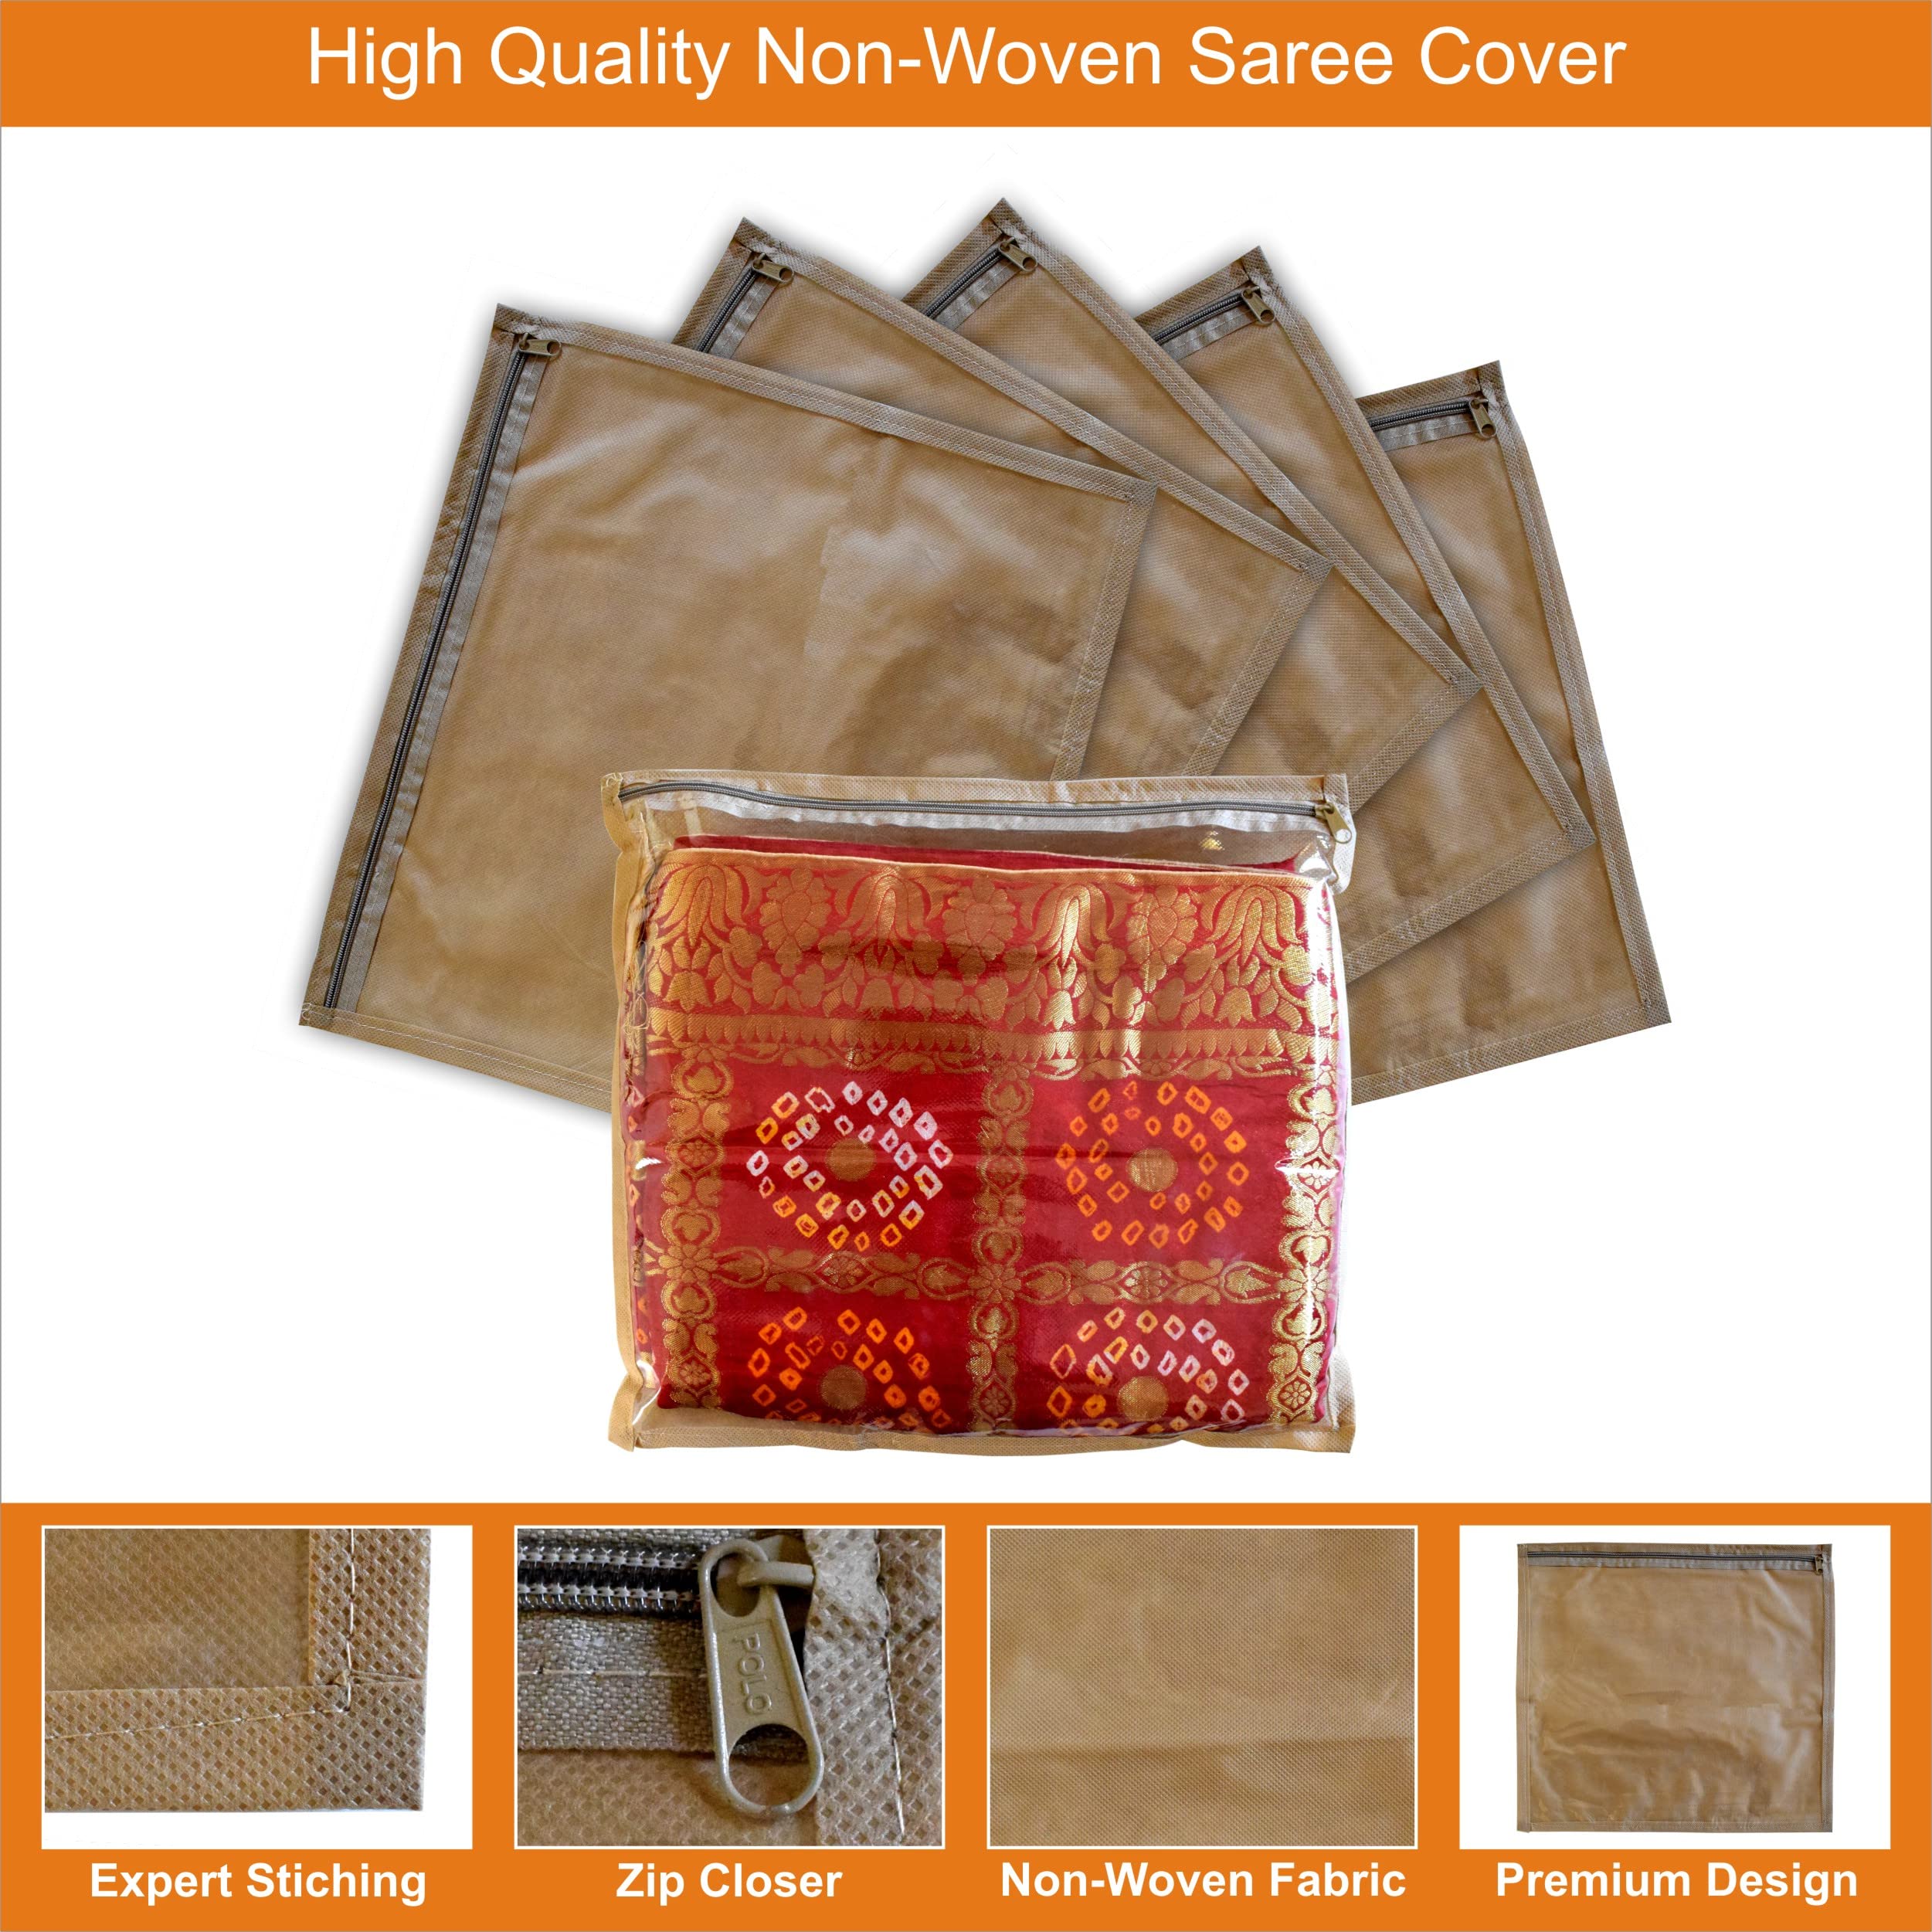 Homestic Foldable Single saree covers with Zip|Saree Storage Bags|Clothes Organiser for wardrobe Set of 12|Transparent Top With Premium Zipper|Beige|